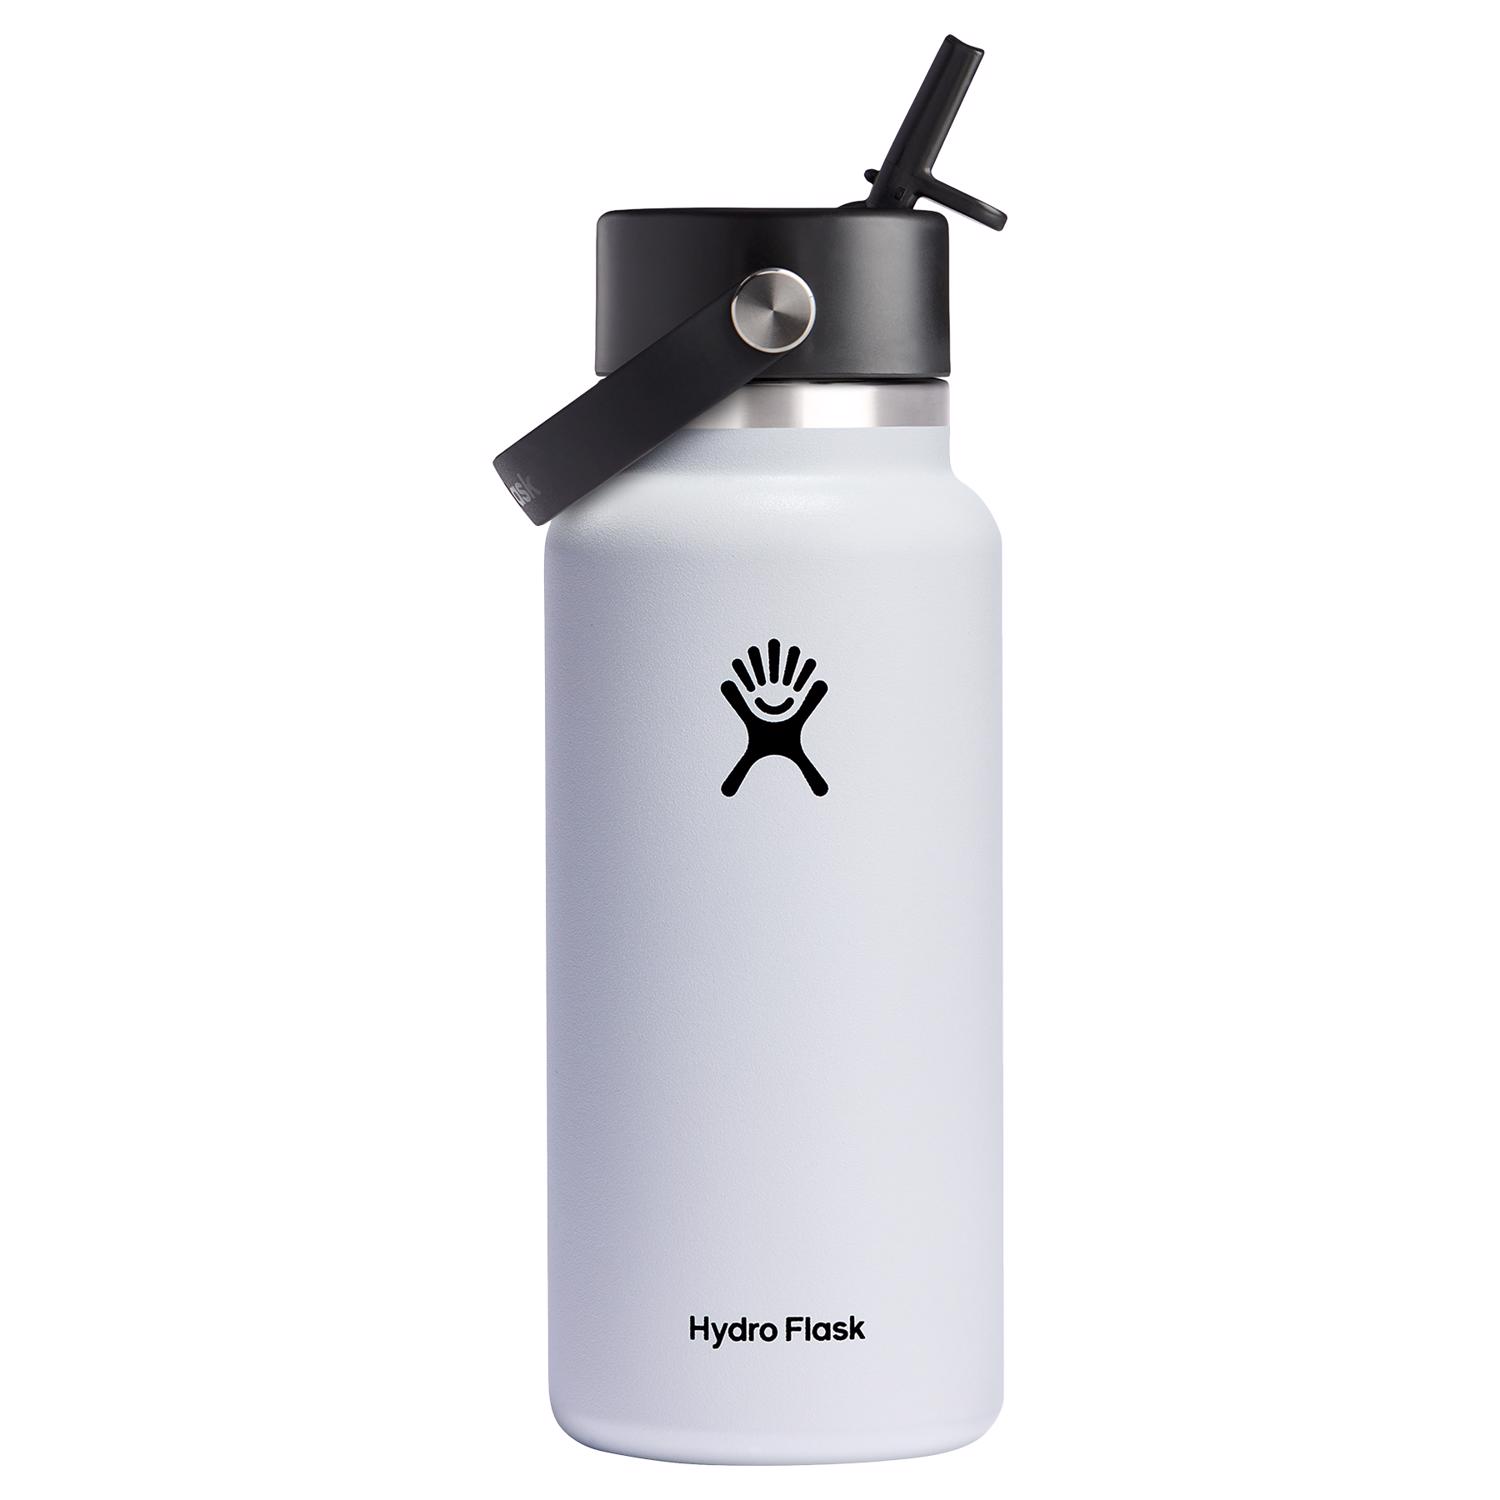 Photos - Other Accessories Hydro Flask 32 oz White BPA Free Insulated Water Bottle W32BFS110 